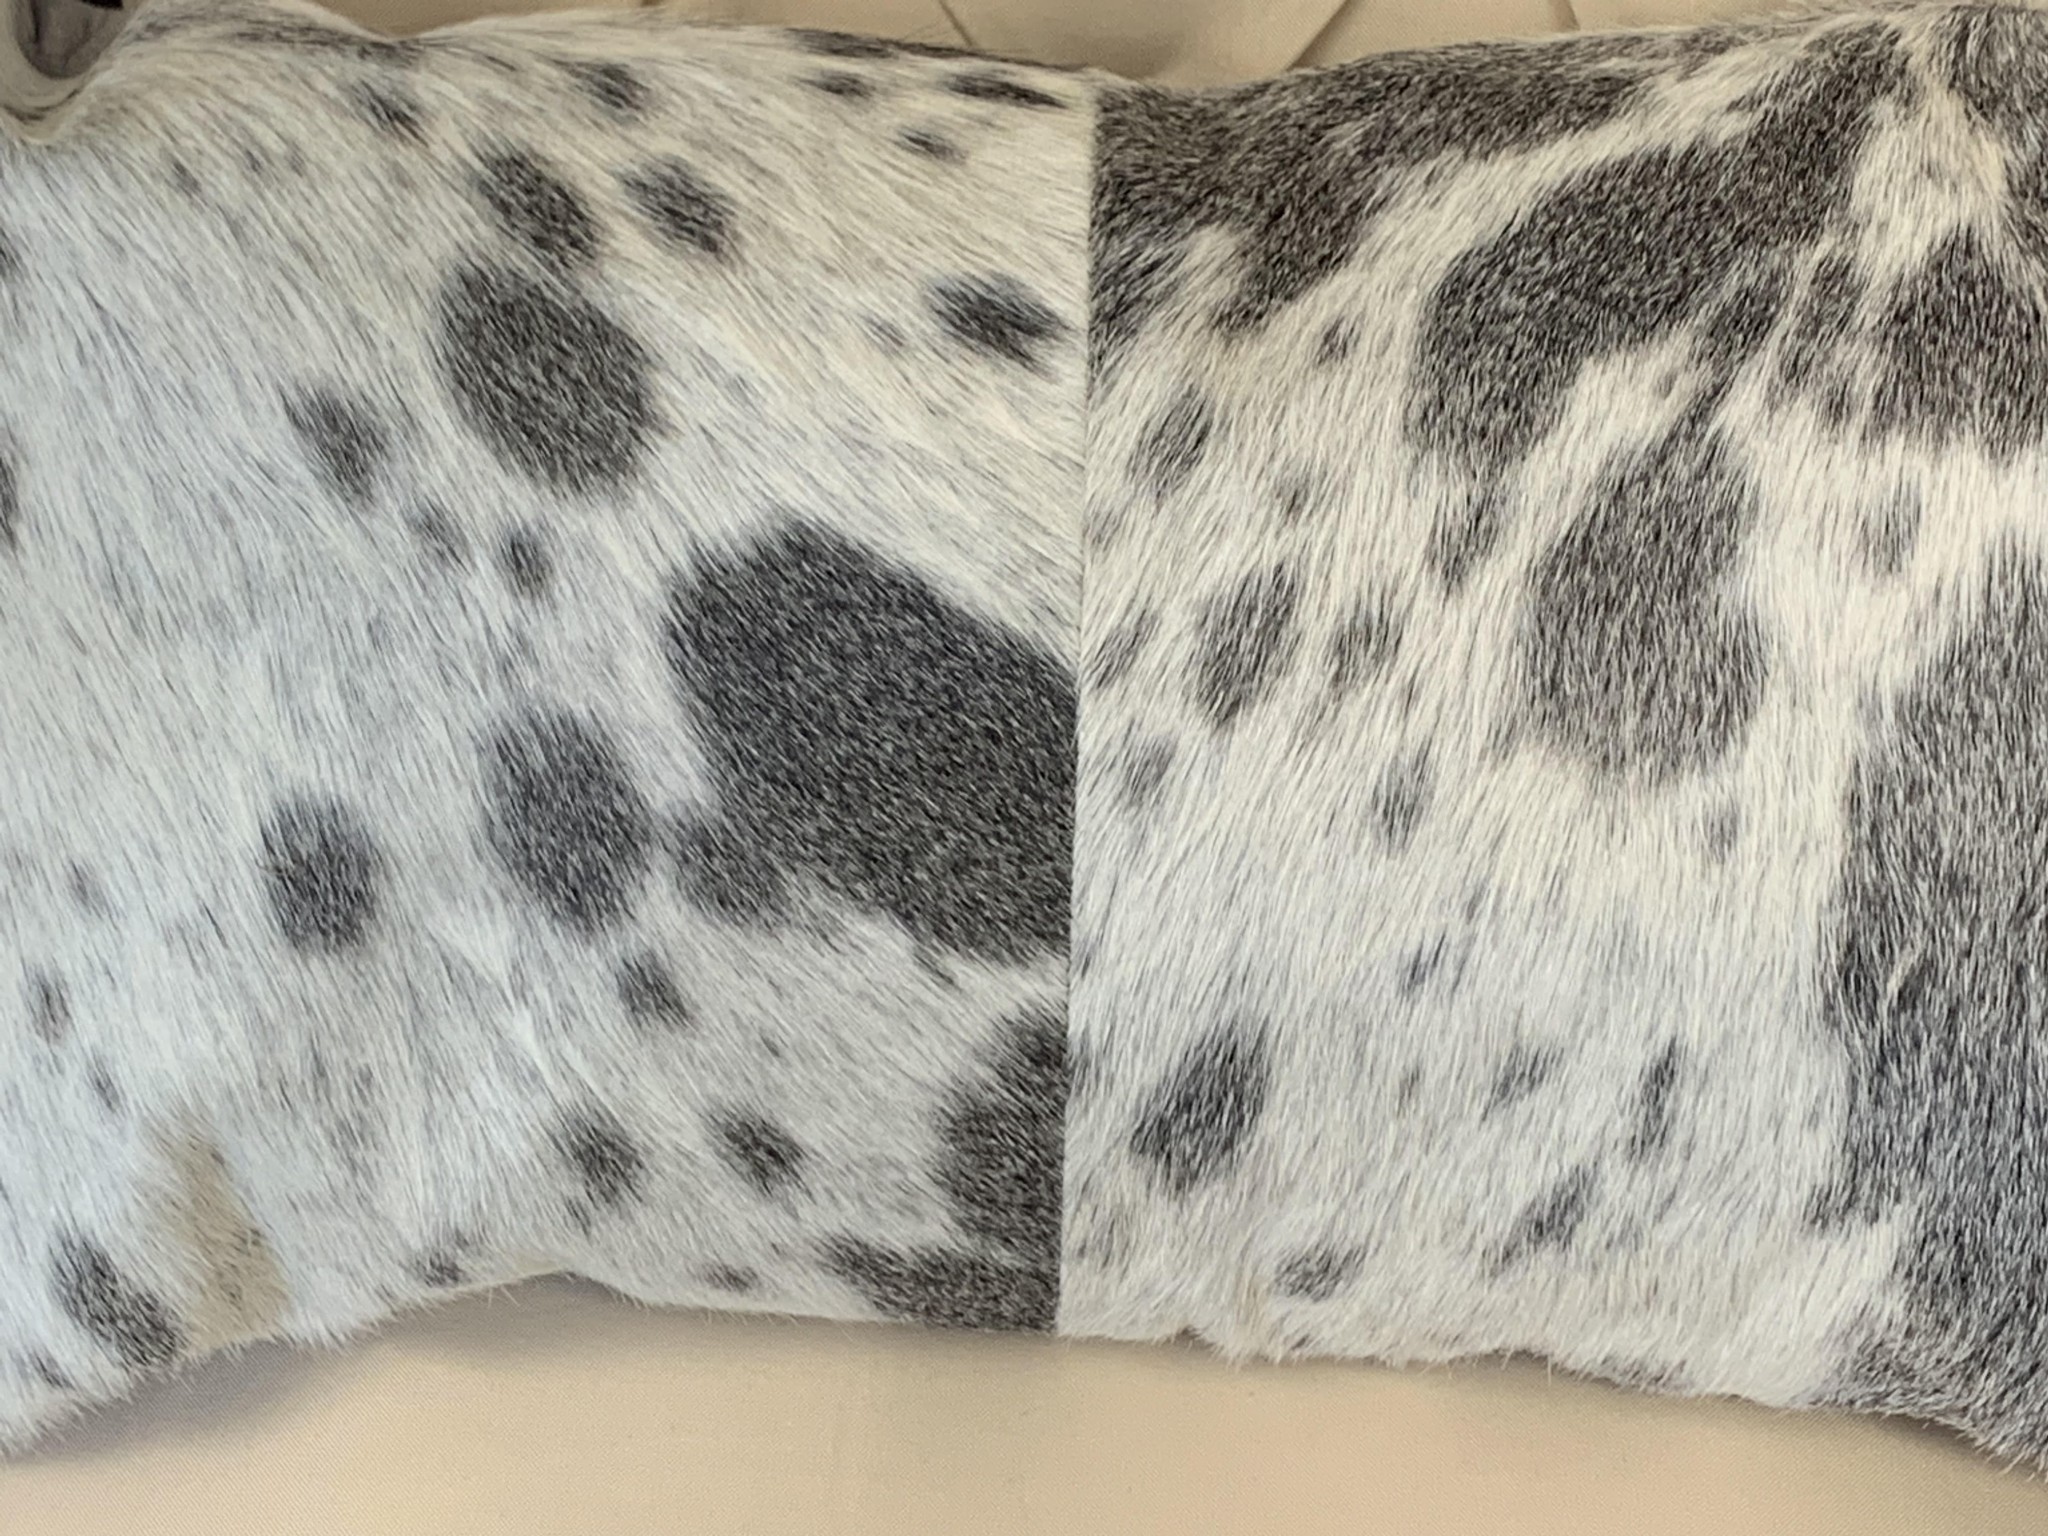 12" x 20" x 5" Gray And White, Cowhide - Pillow 2-Pack